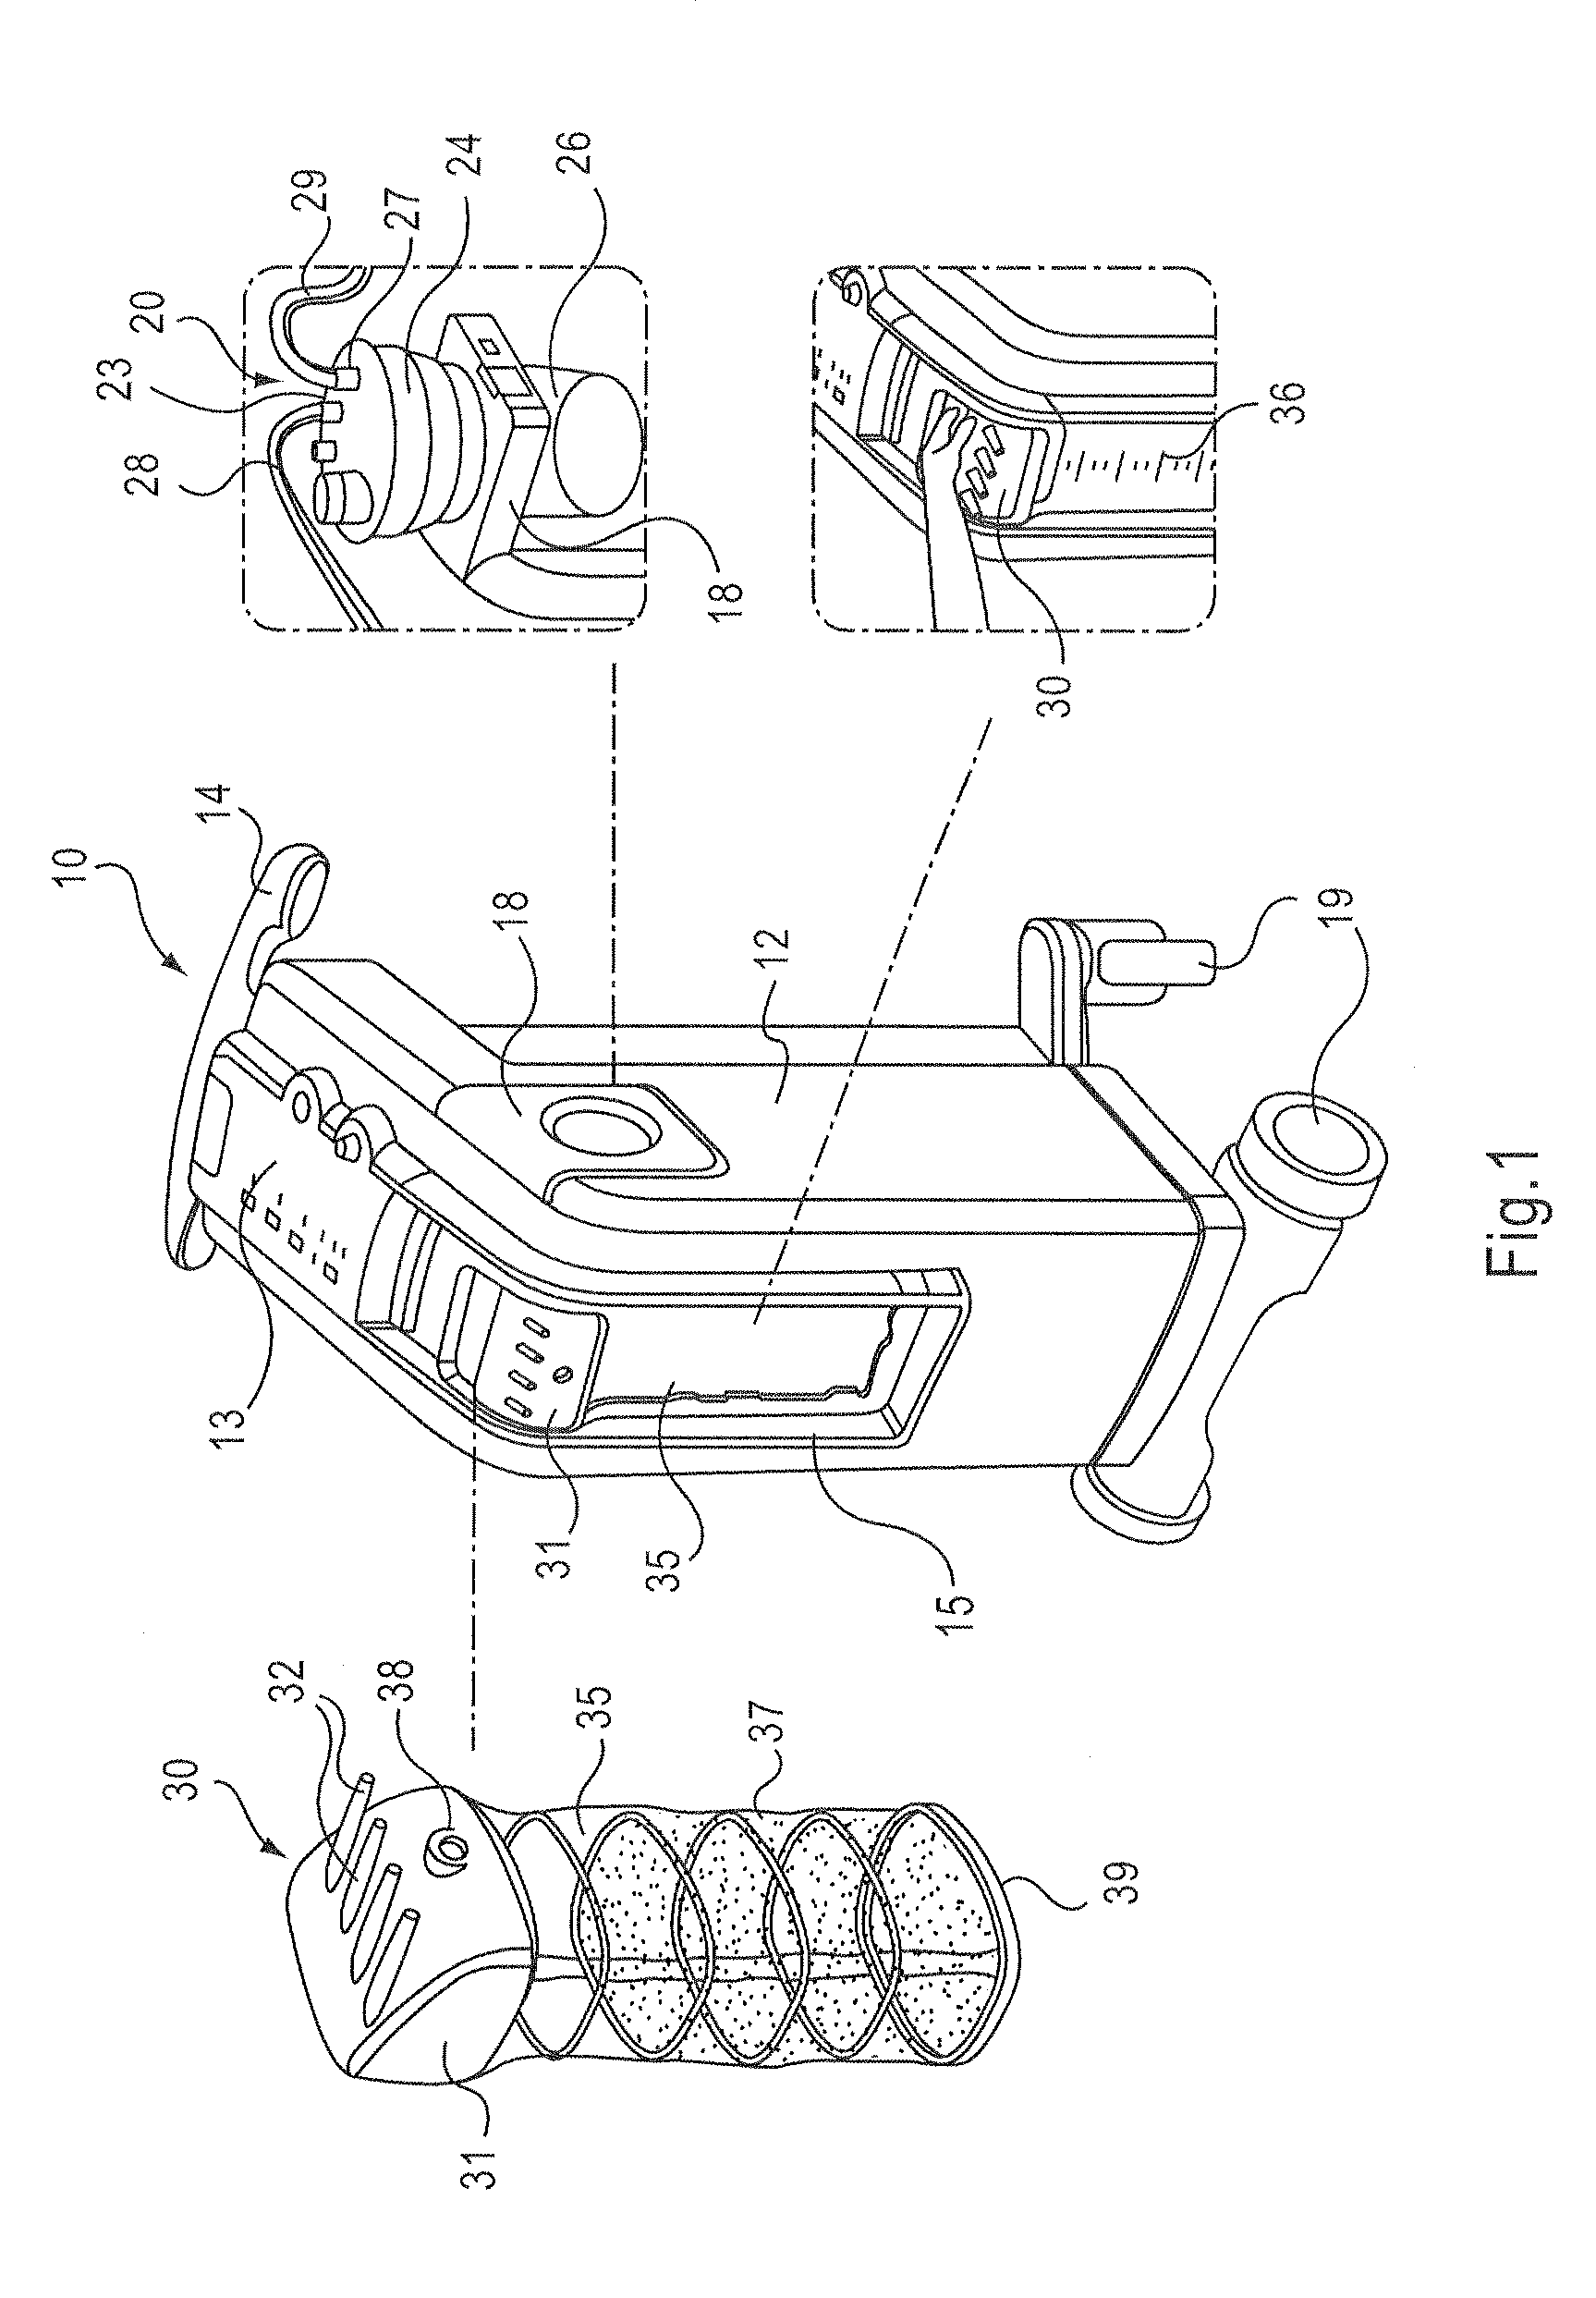 Fluid collection and disposal system having interchangeable collection and other features and methods relating thereto